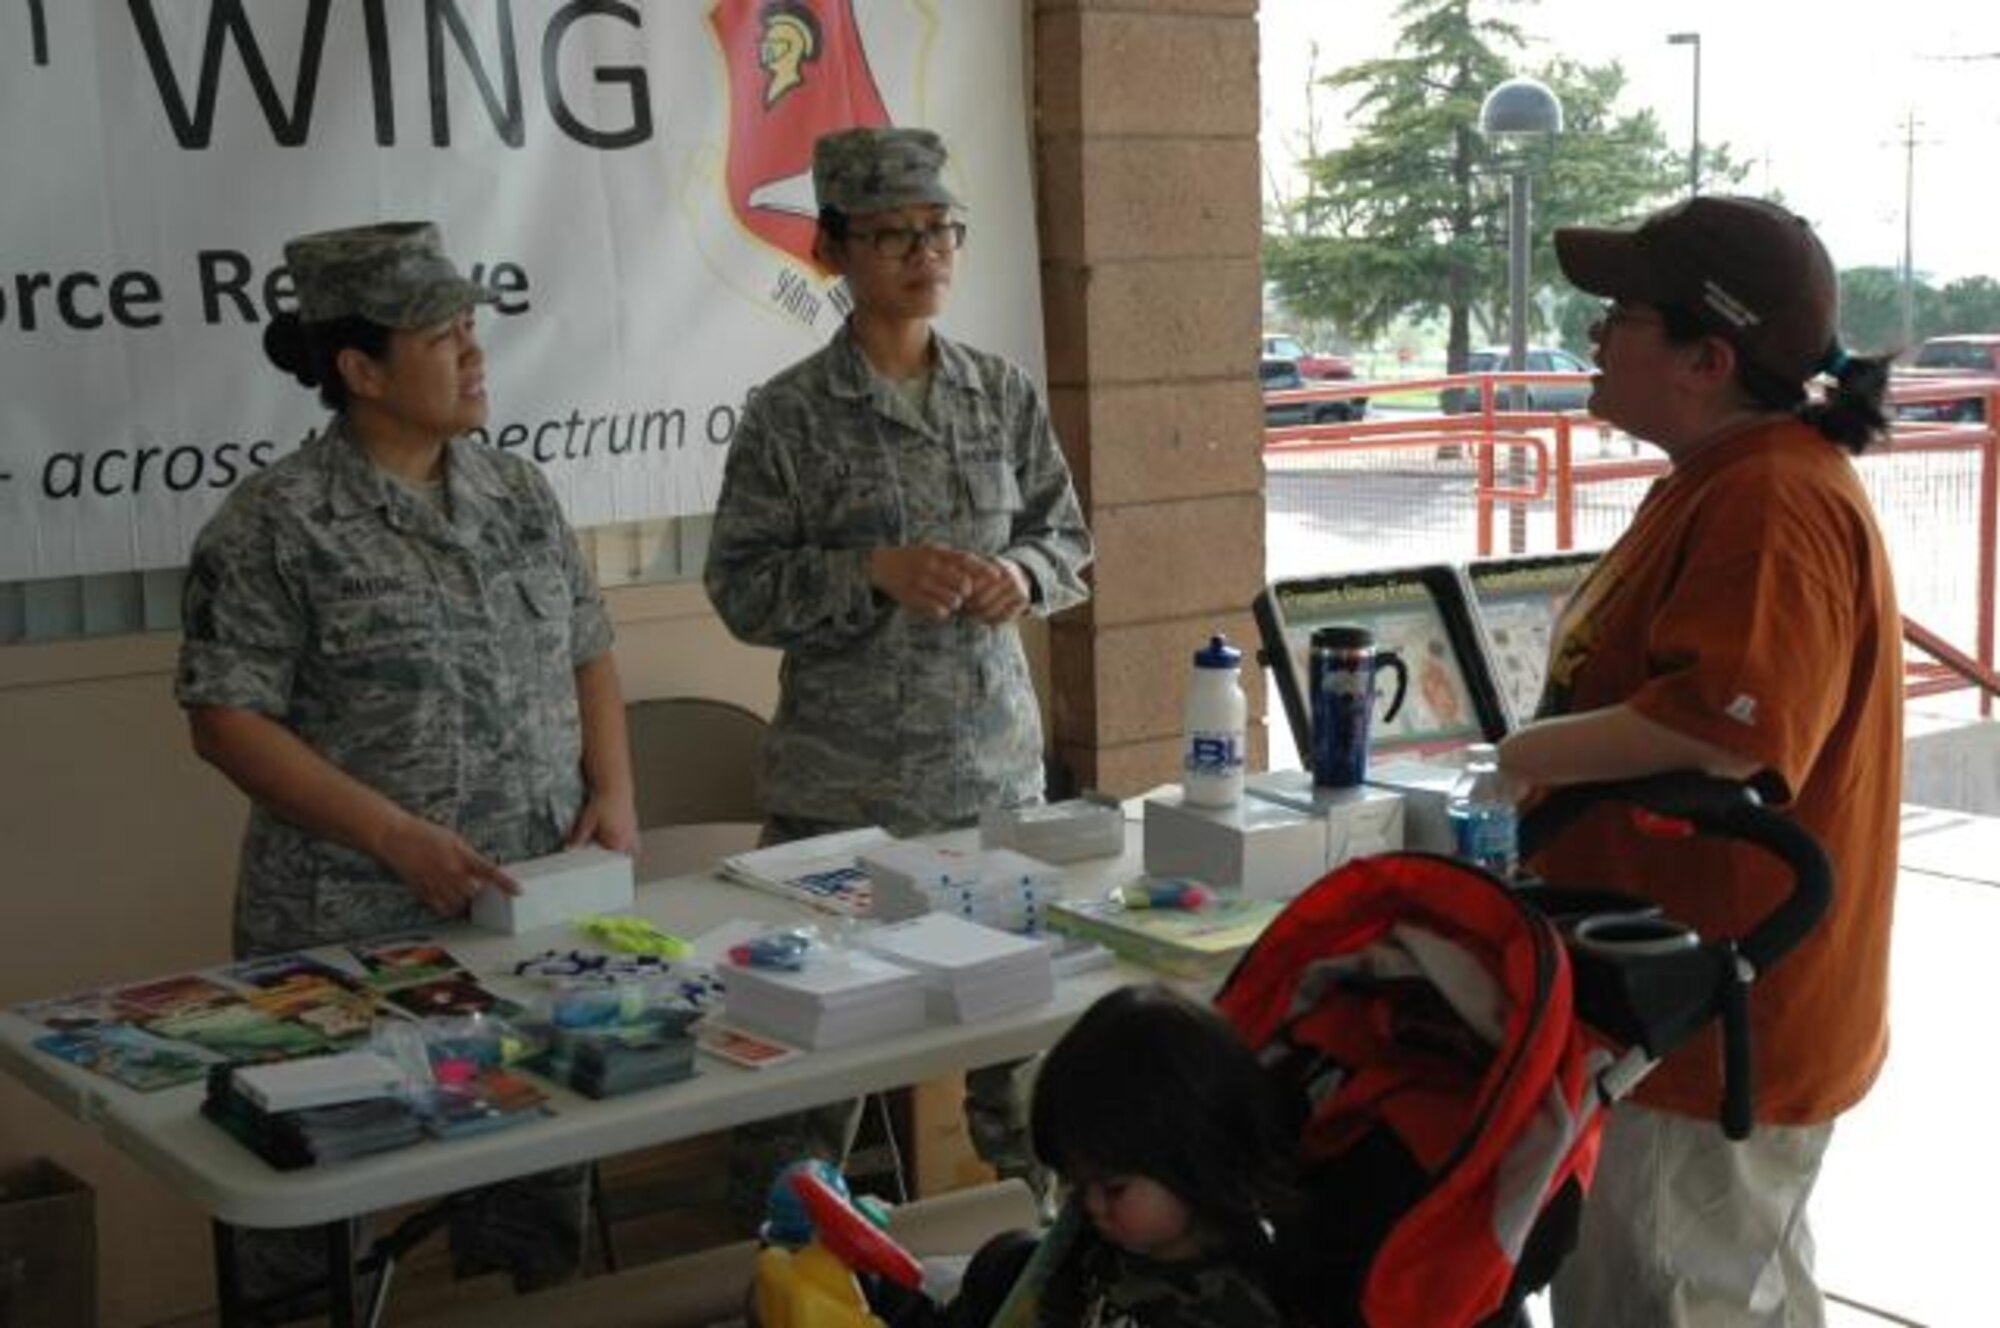 SMSgt Havens (left) explains the benefits of a drug free lifestyle during a health fair at her sons' school March 19. SMSgt Havens was asked to attend the fair to help educate parents and students about drug and alcohol abuse prevention. (U.S. Air Force Photo/Dana Lineback)